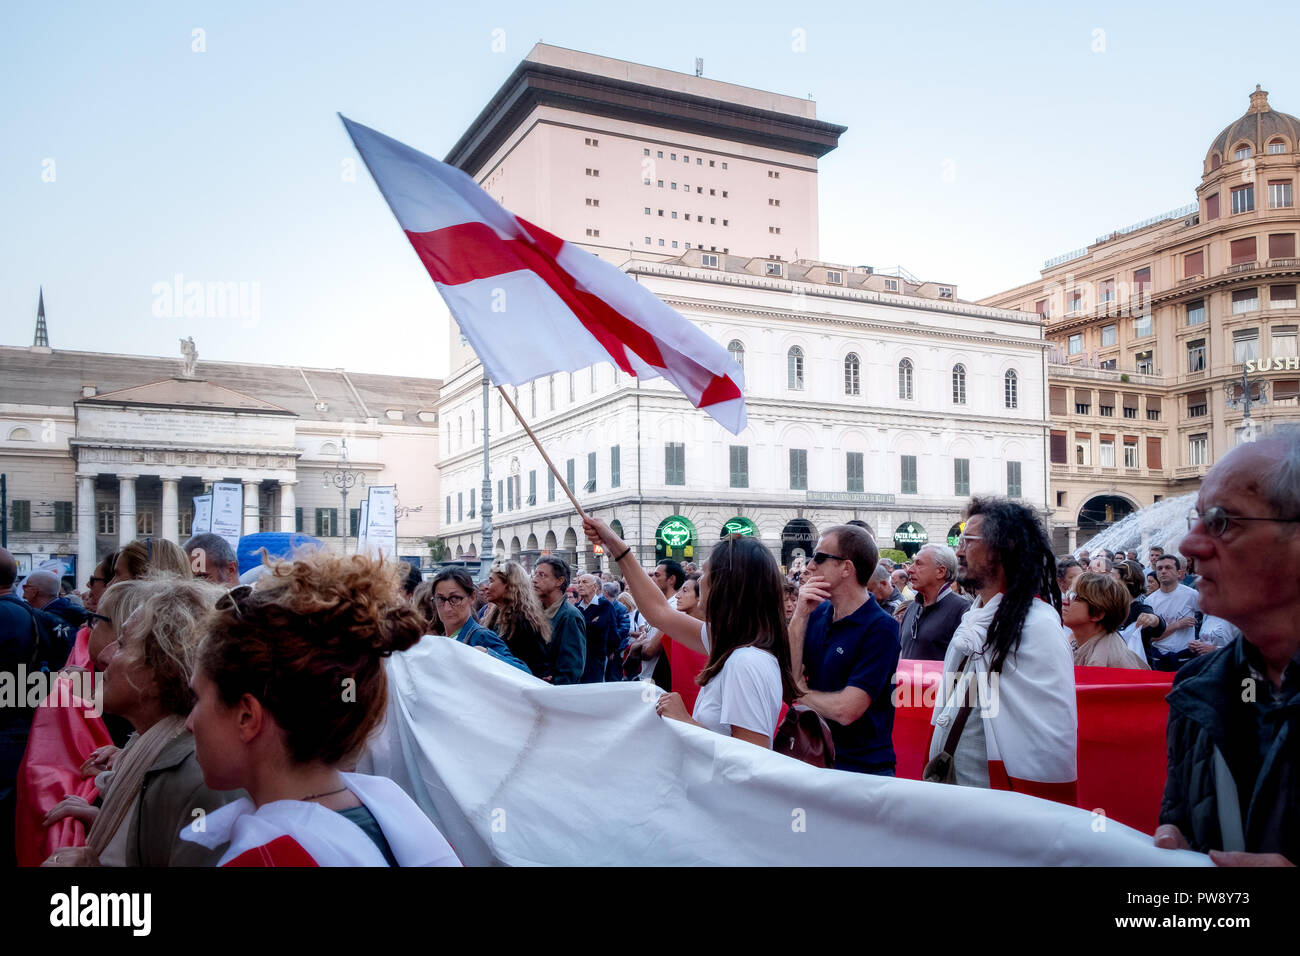 Genoa, Italy. 13th October, 2018. Demonstration by the citizens of Genoa, two months after the collapse of the Morandi bridge, asking for more help and more attention from the entire civil and political world to solve the great problems of the population. Genoa, Italy. © Emanuele Dello Strologo / Awakening / Alamy Live News Stock Photo